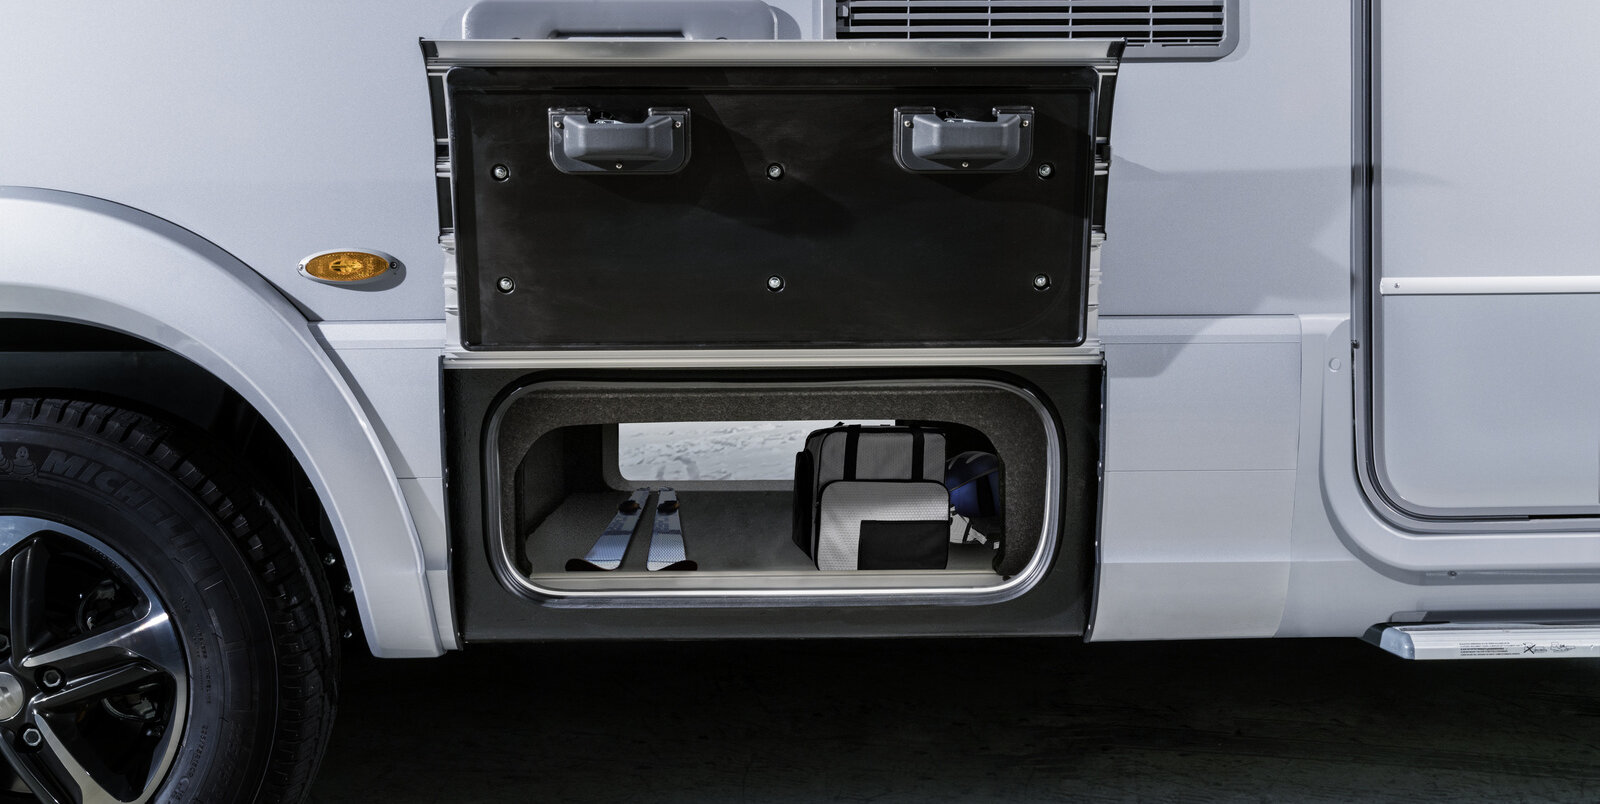 Through-loading compartment open on both sides, loaded with a pair of skis and bags in the HYMER B-MasterLine with SLC chassis